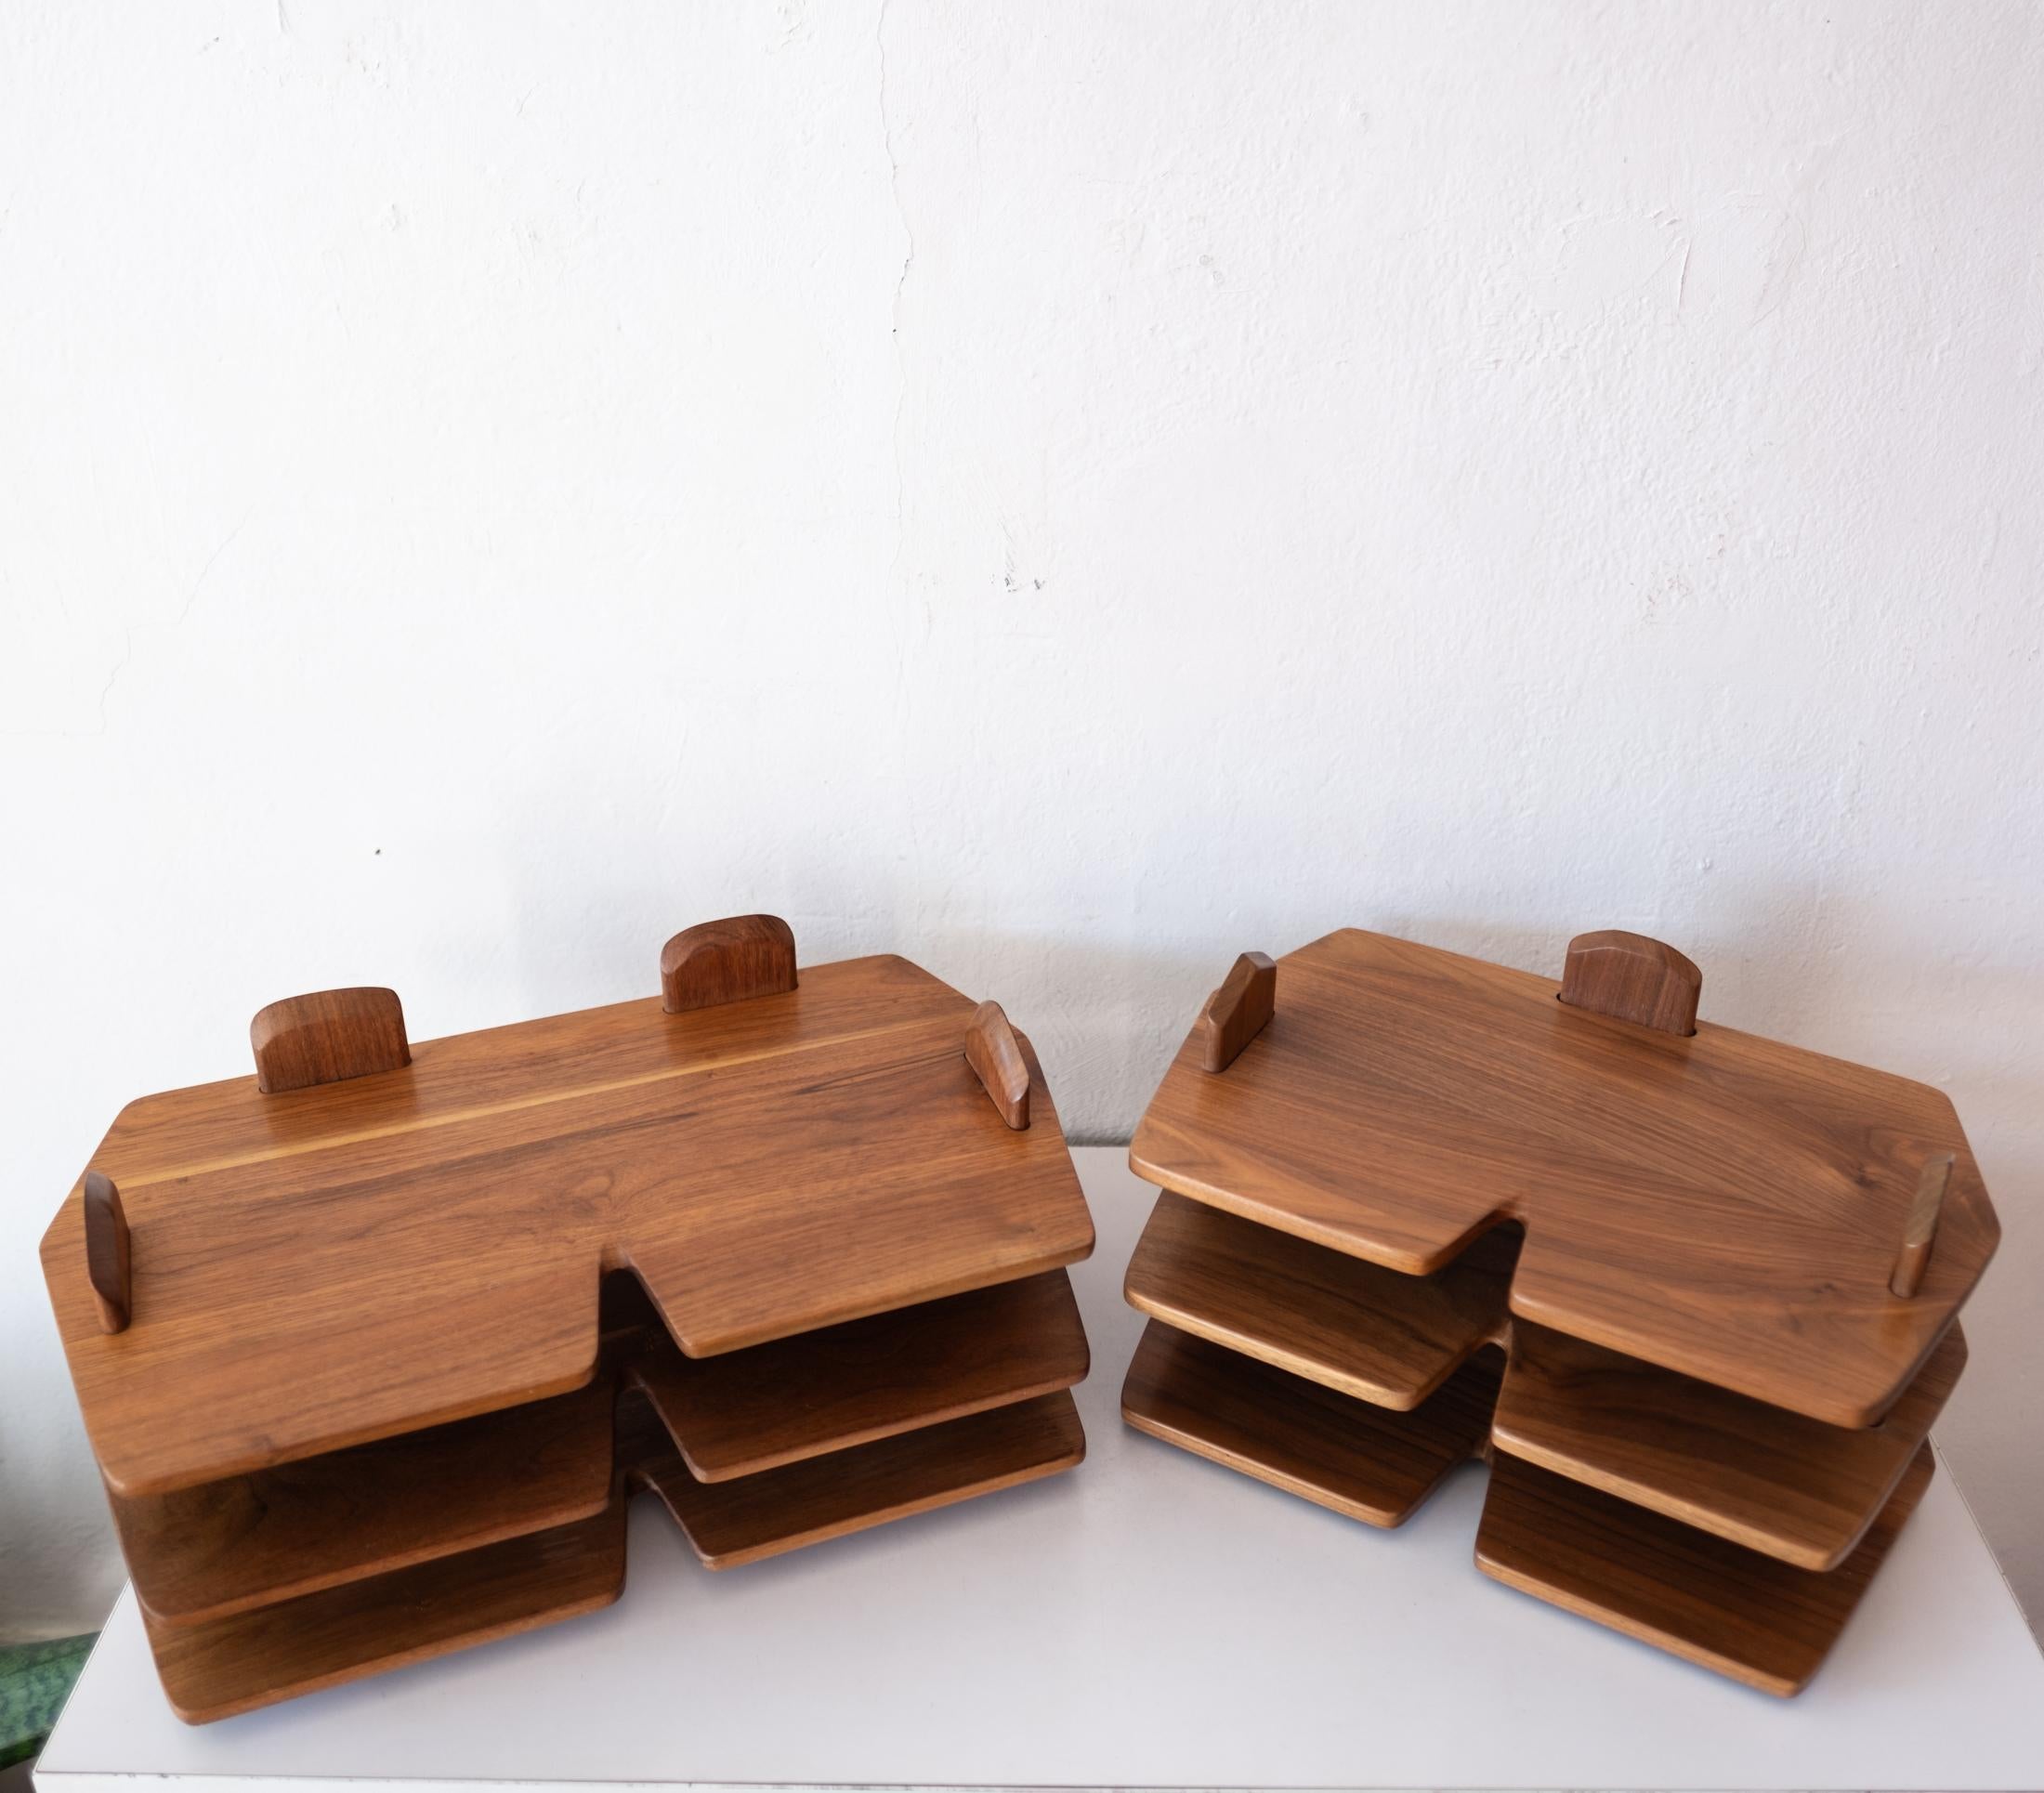 American Handcrafted Studio Wood Letter Trays by Appalachian Artist Kelly Mehler For Sale